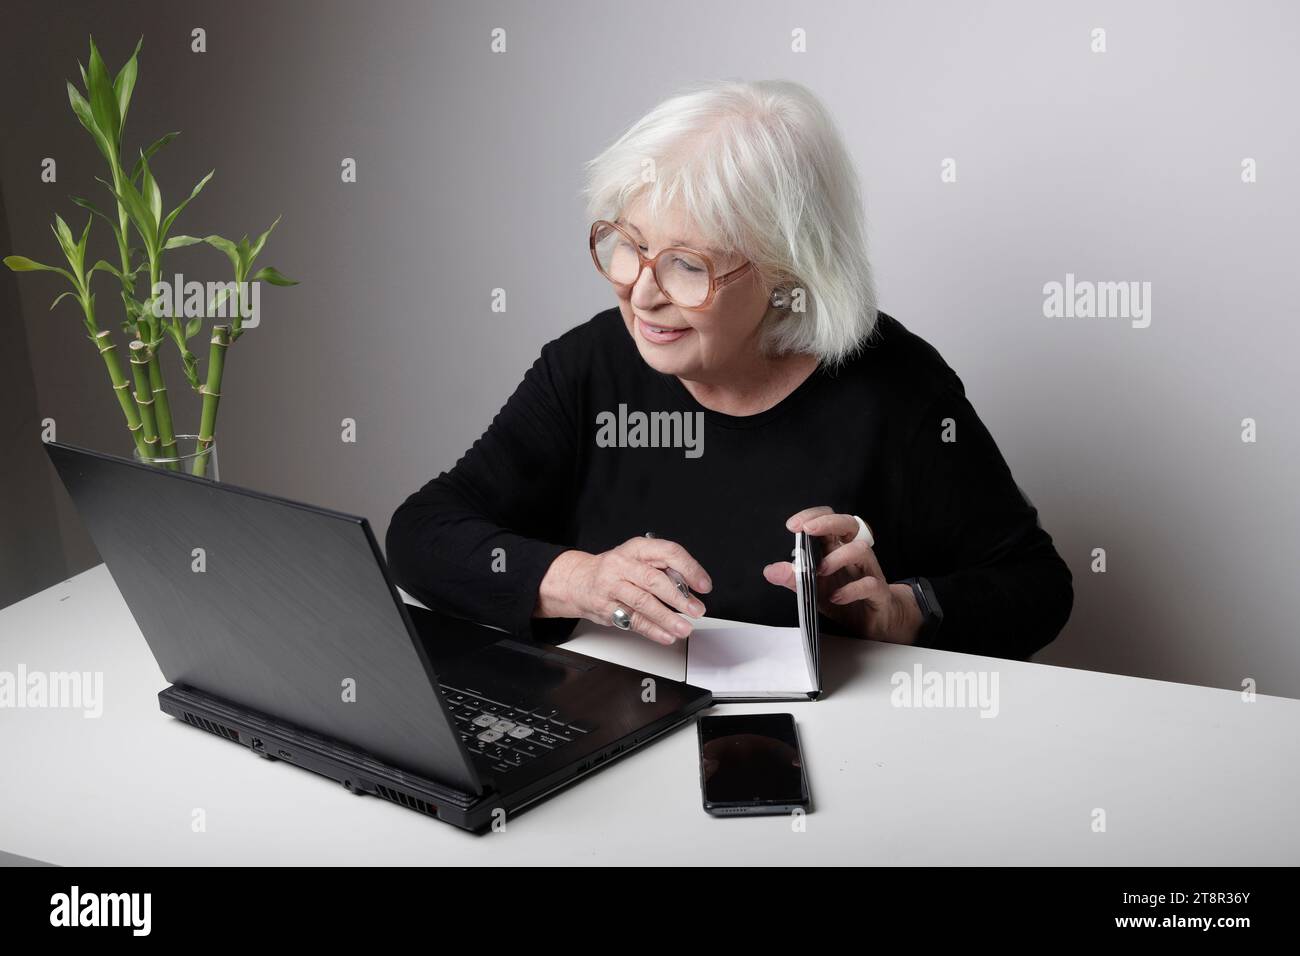 senior woman jotting down notes in a notebook sitting in front of a laptop Stock Photo